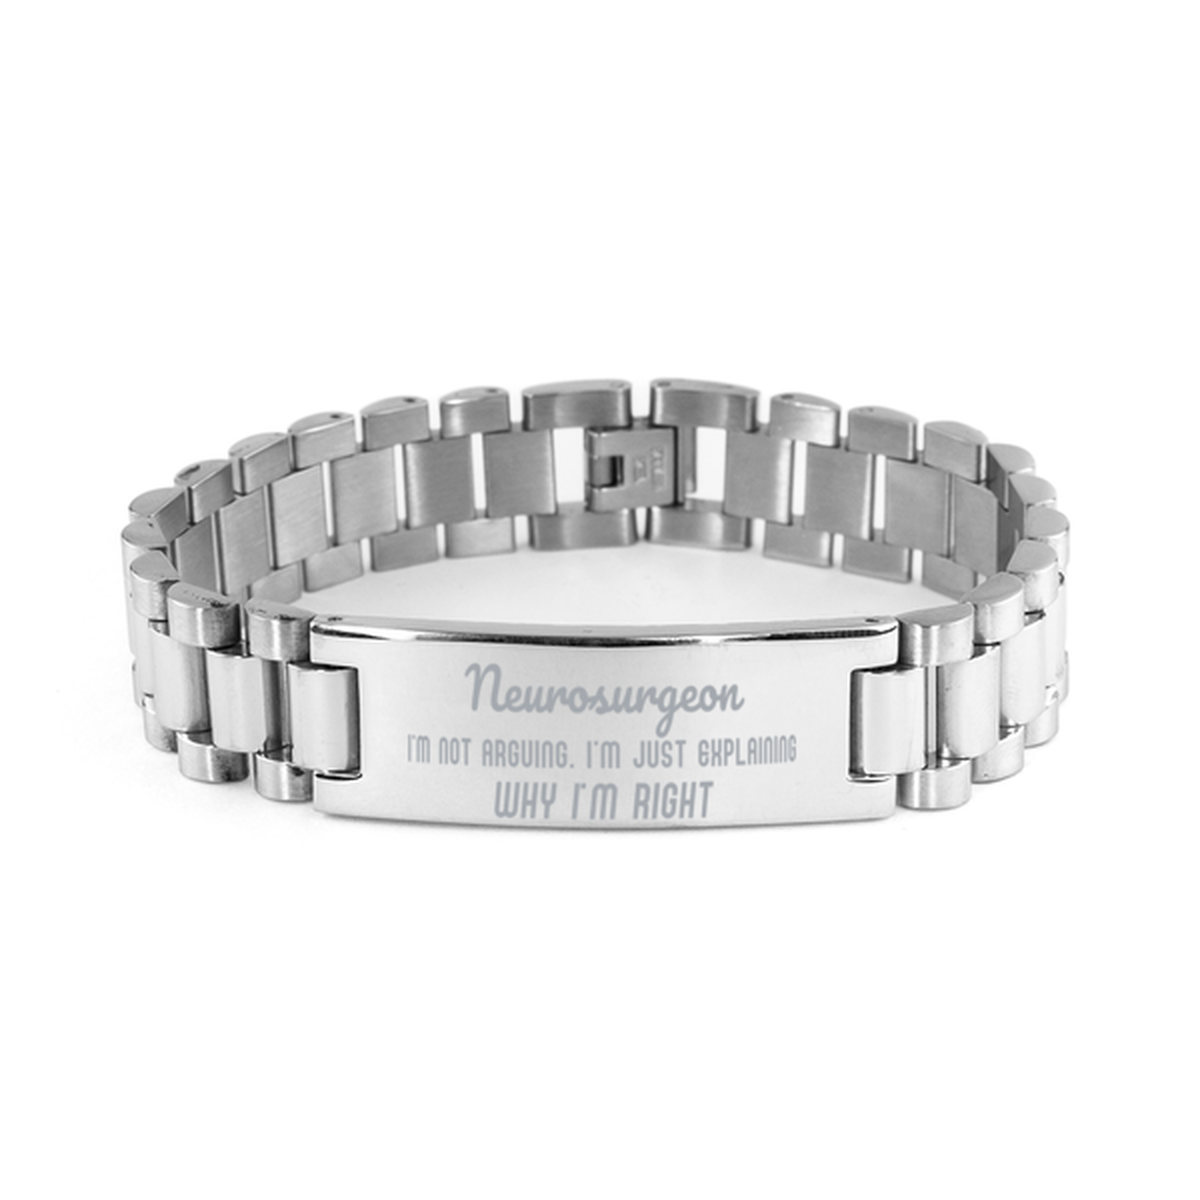 Neurosurgeon I'm not Arguing. I'm Just Explaining Why I'm RIGHT Ladder Stainless Steel Bracelet, Graduation Birthday Christmas Neurosurgeon Gifts For Neurosurgeon Funny Saying Quote Present for Men Women Coworker